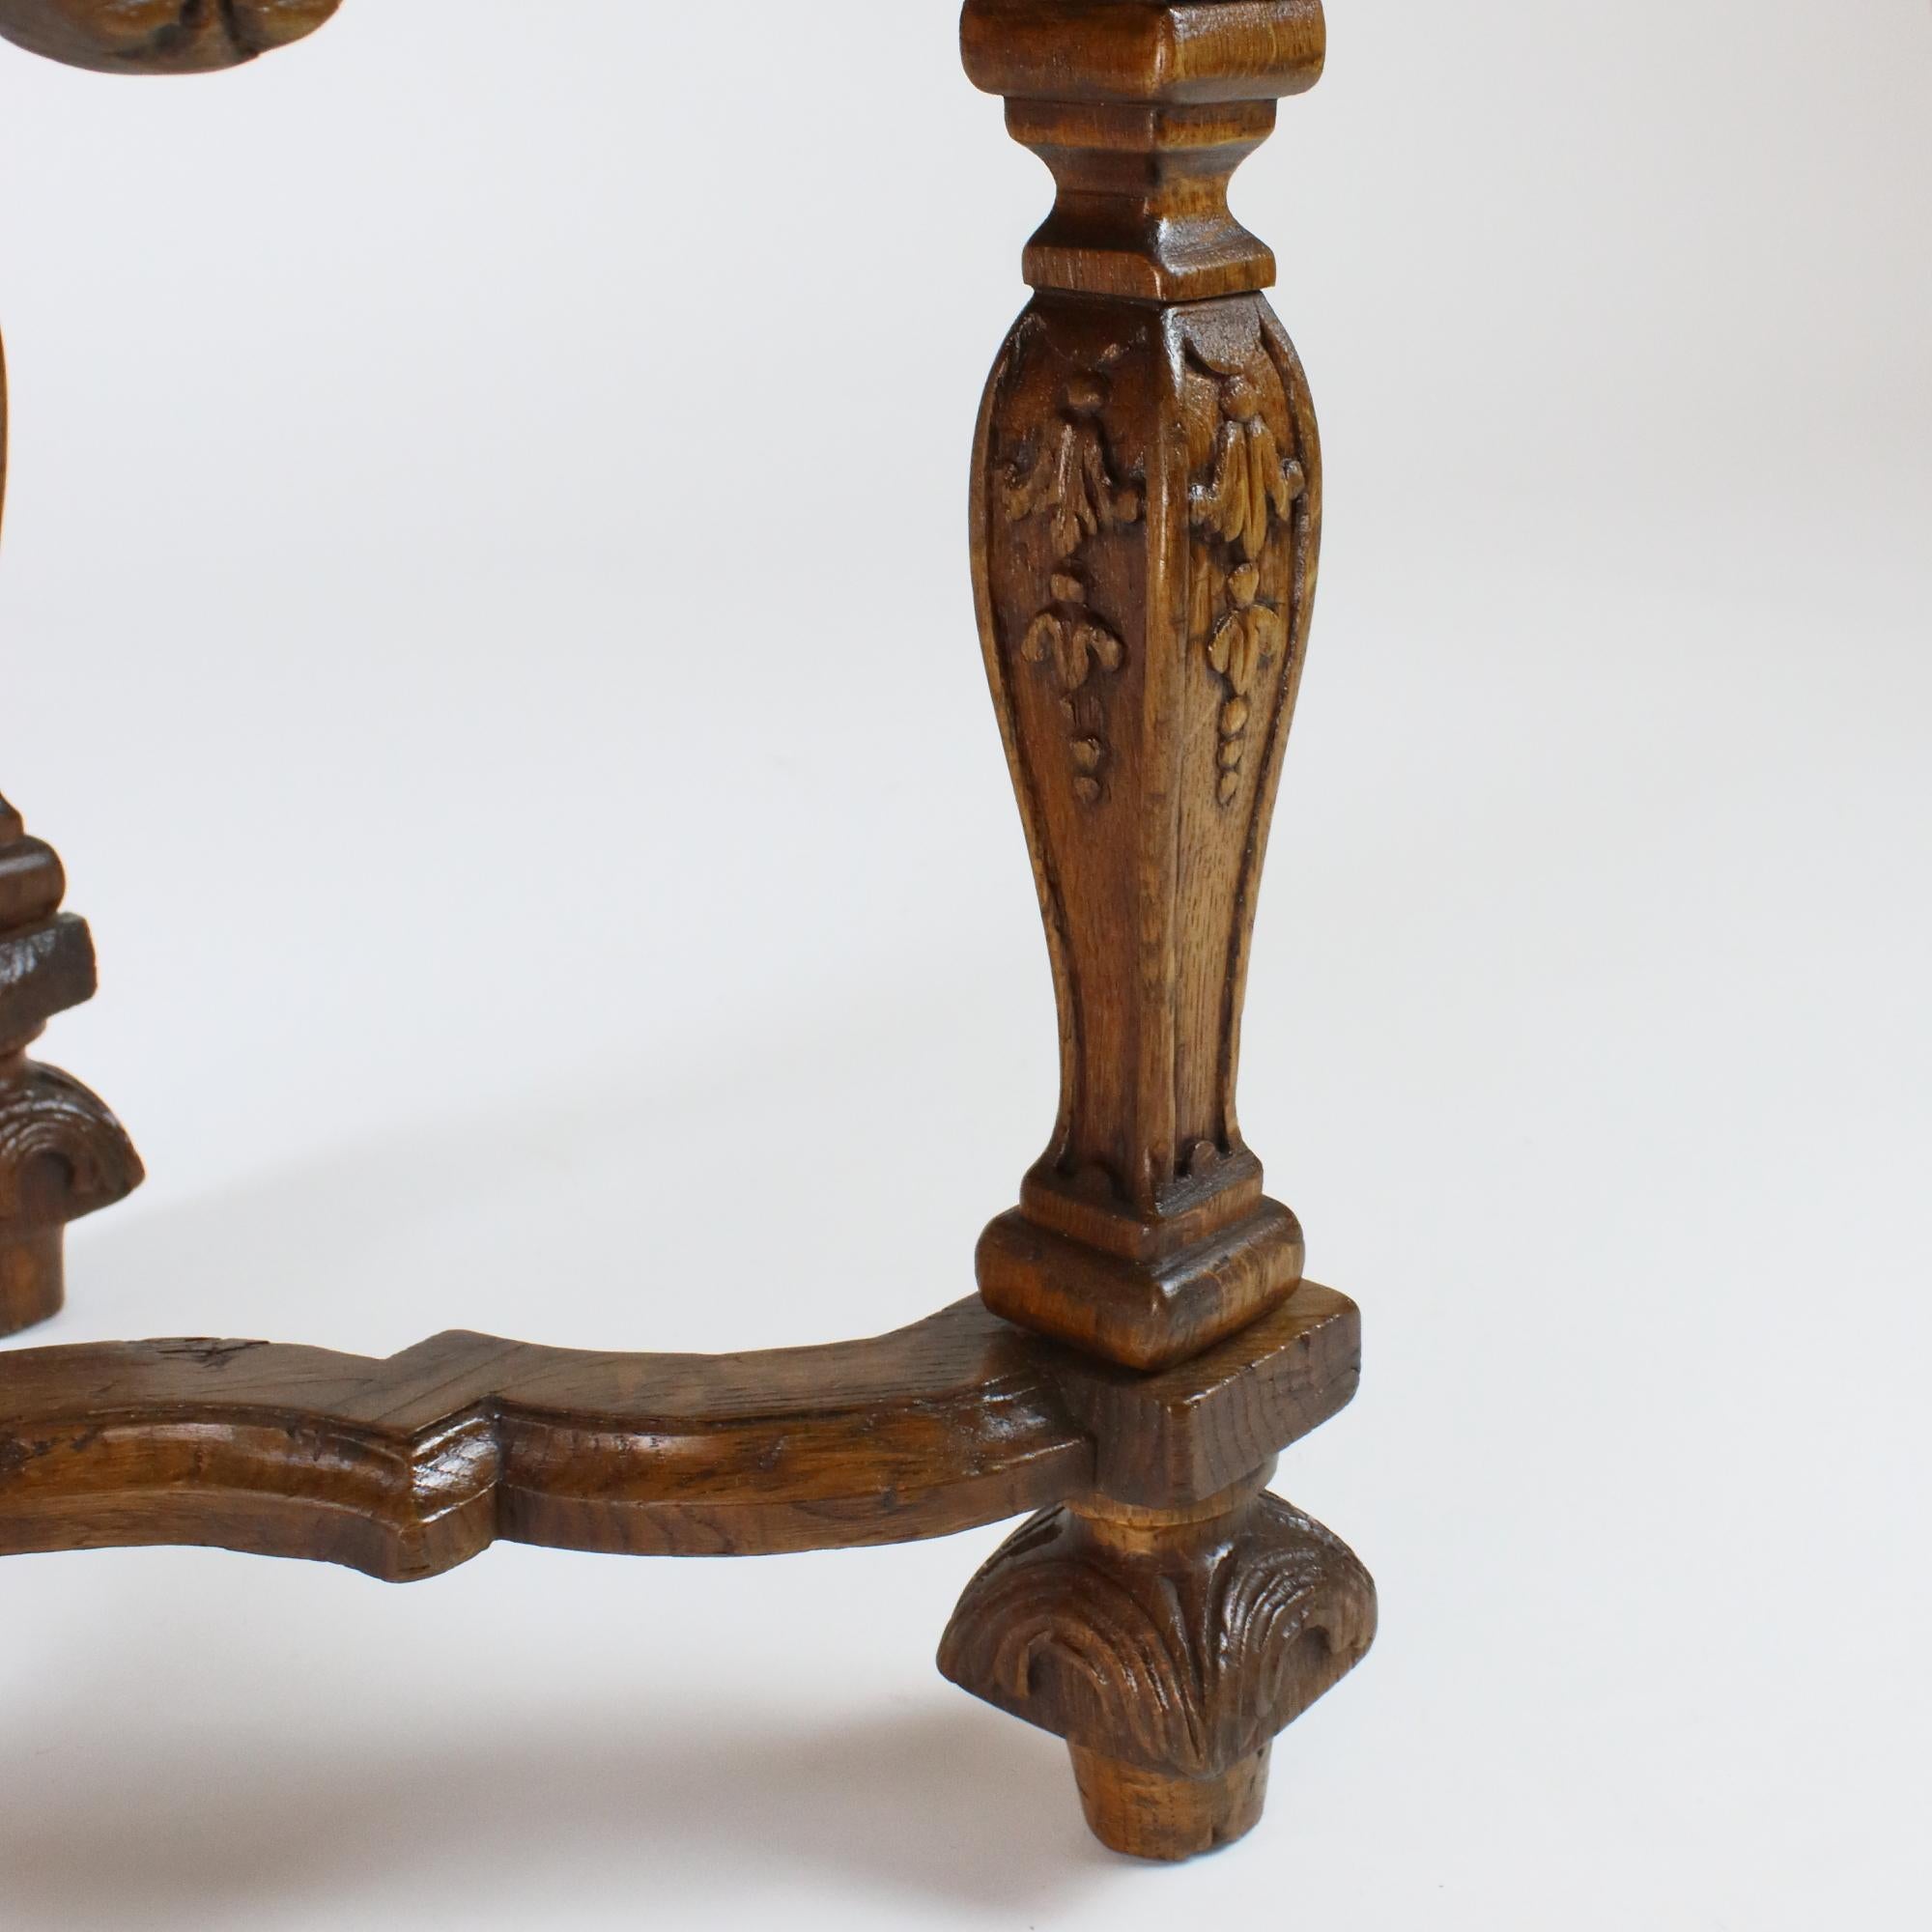 Early 18th Century French Louis XIV/Régence Carved Oak Stool or Tabouret For Sale 3